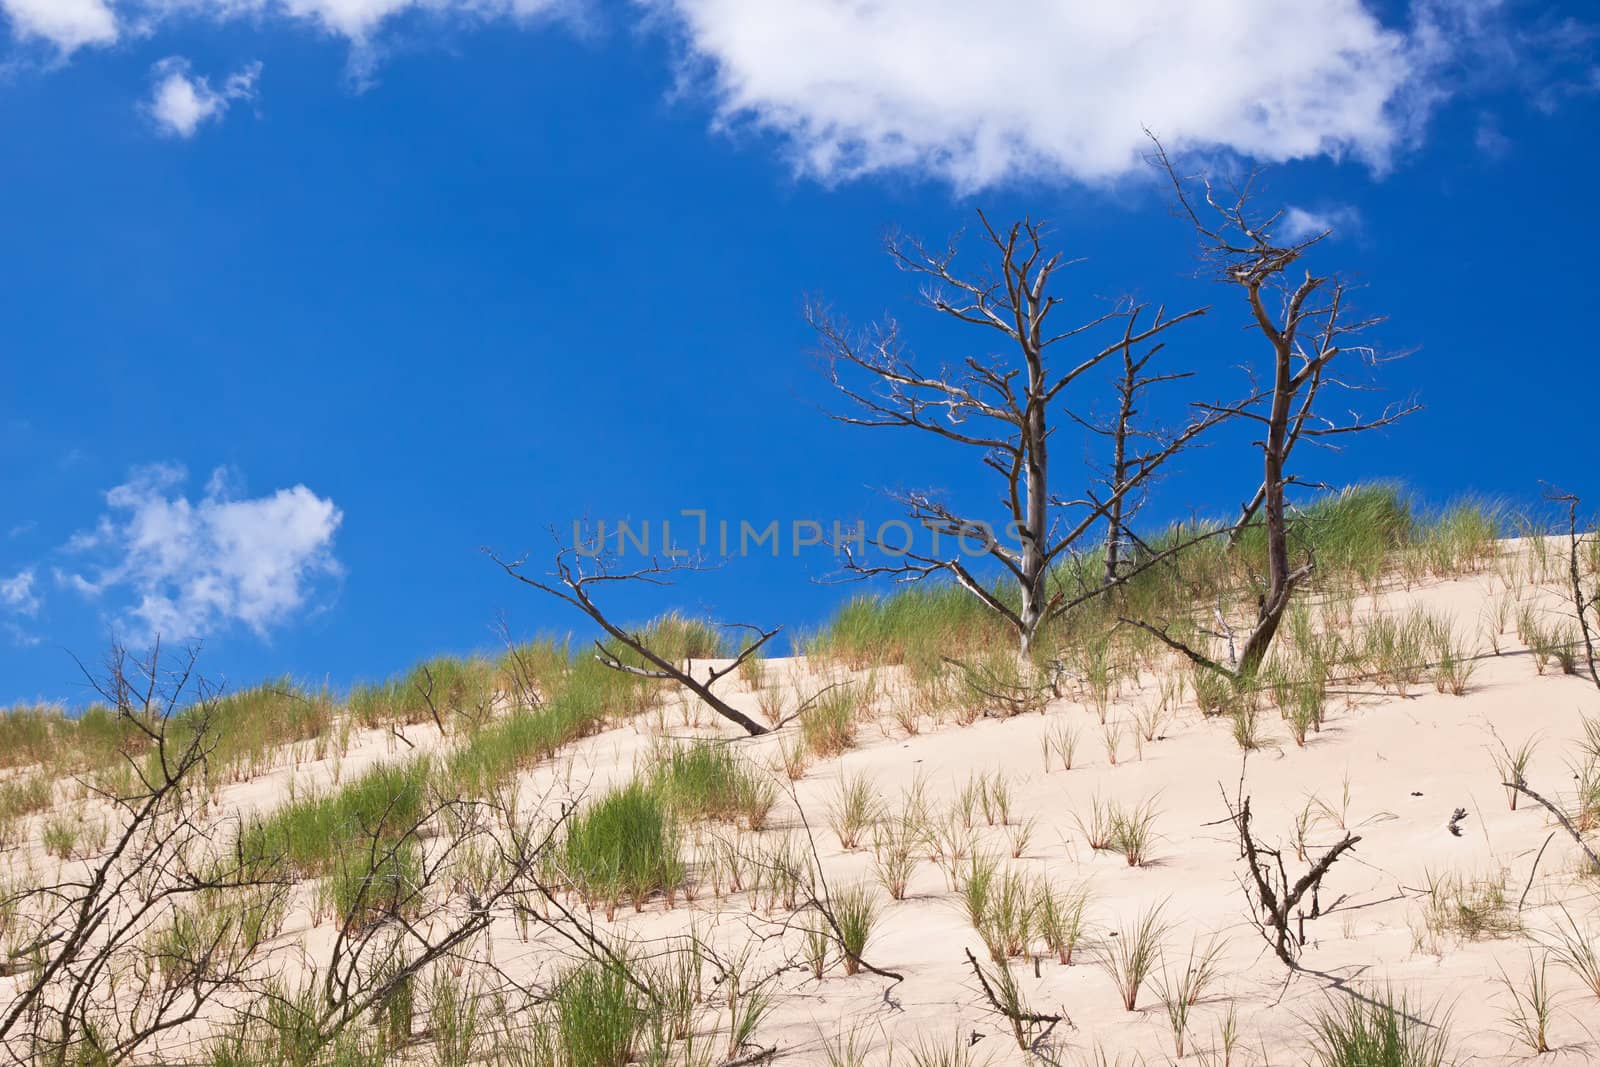 Moving dunes near the Baltic Sea in Slowinski park